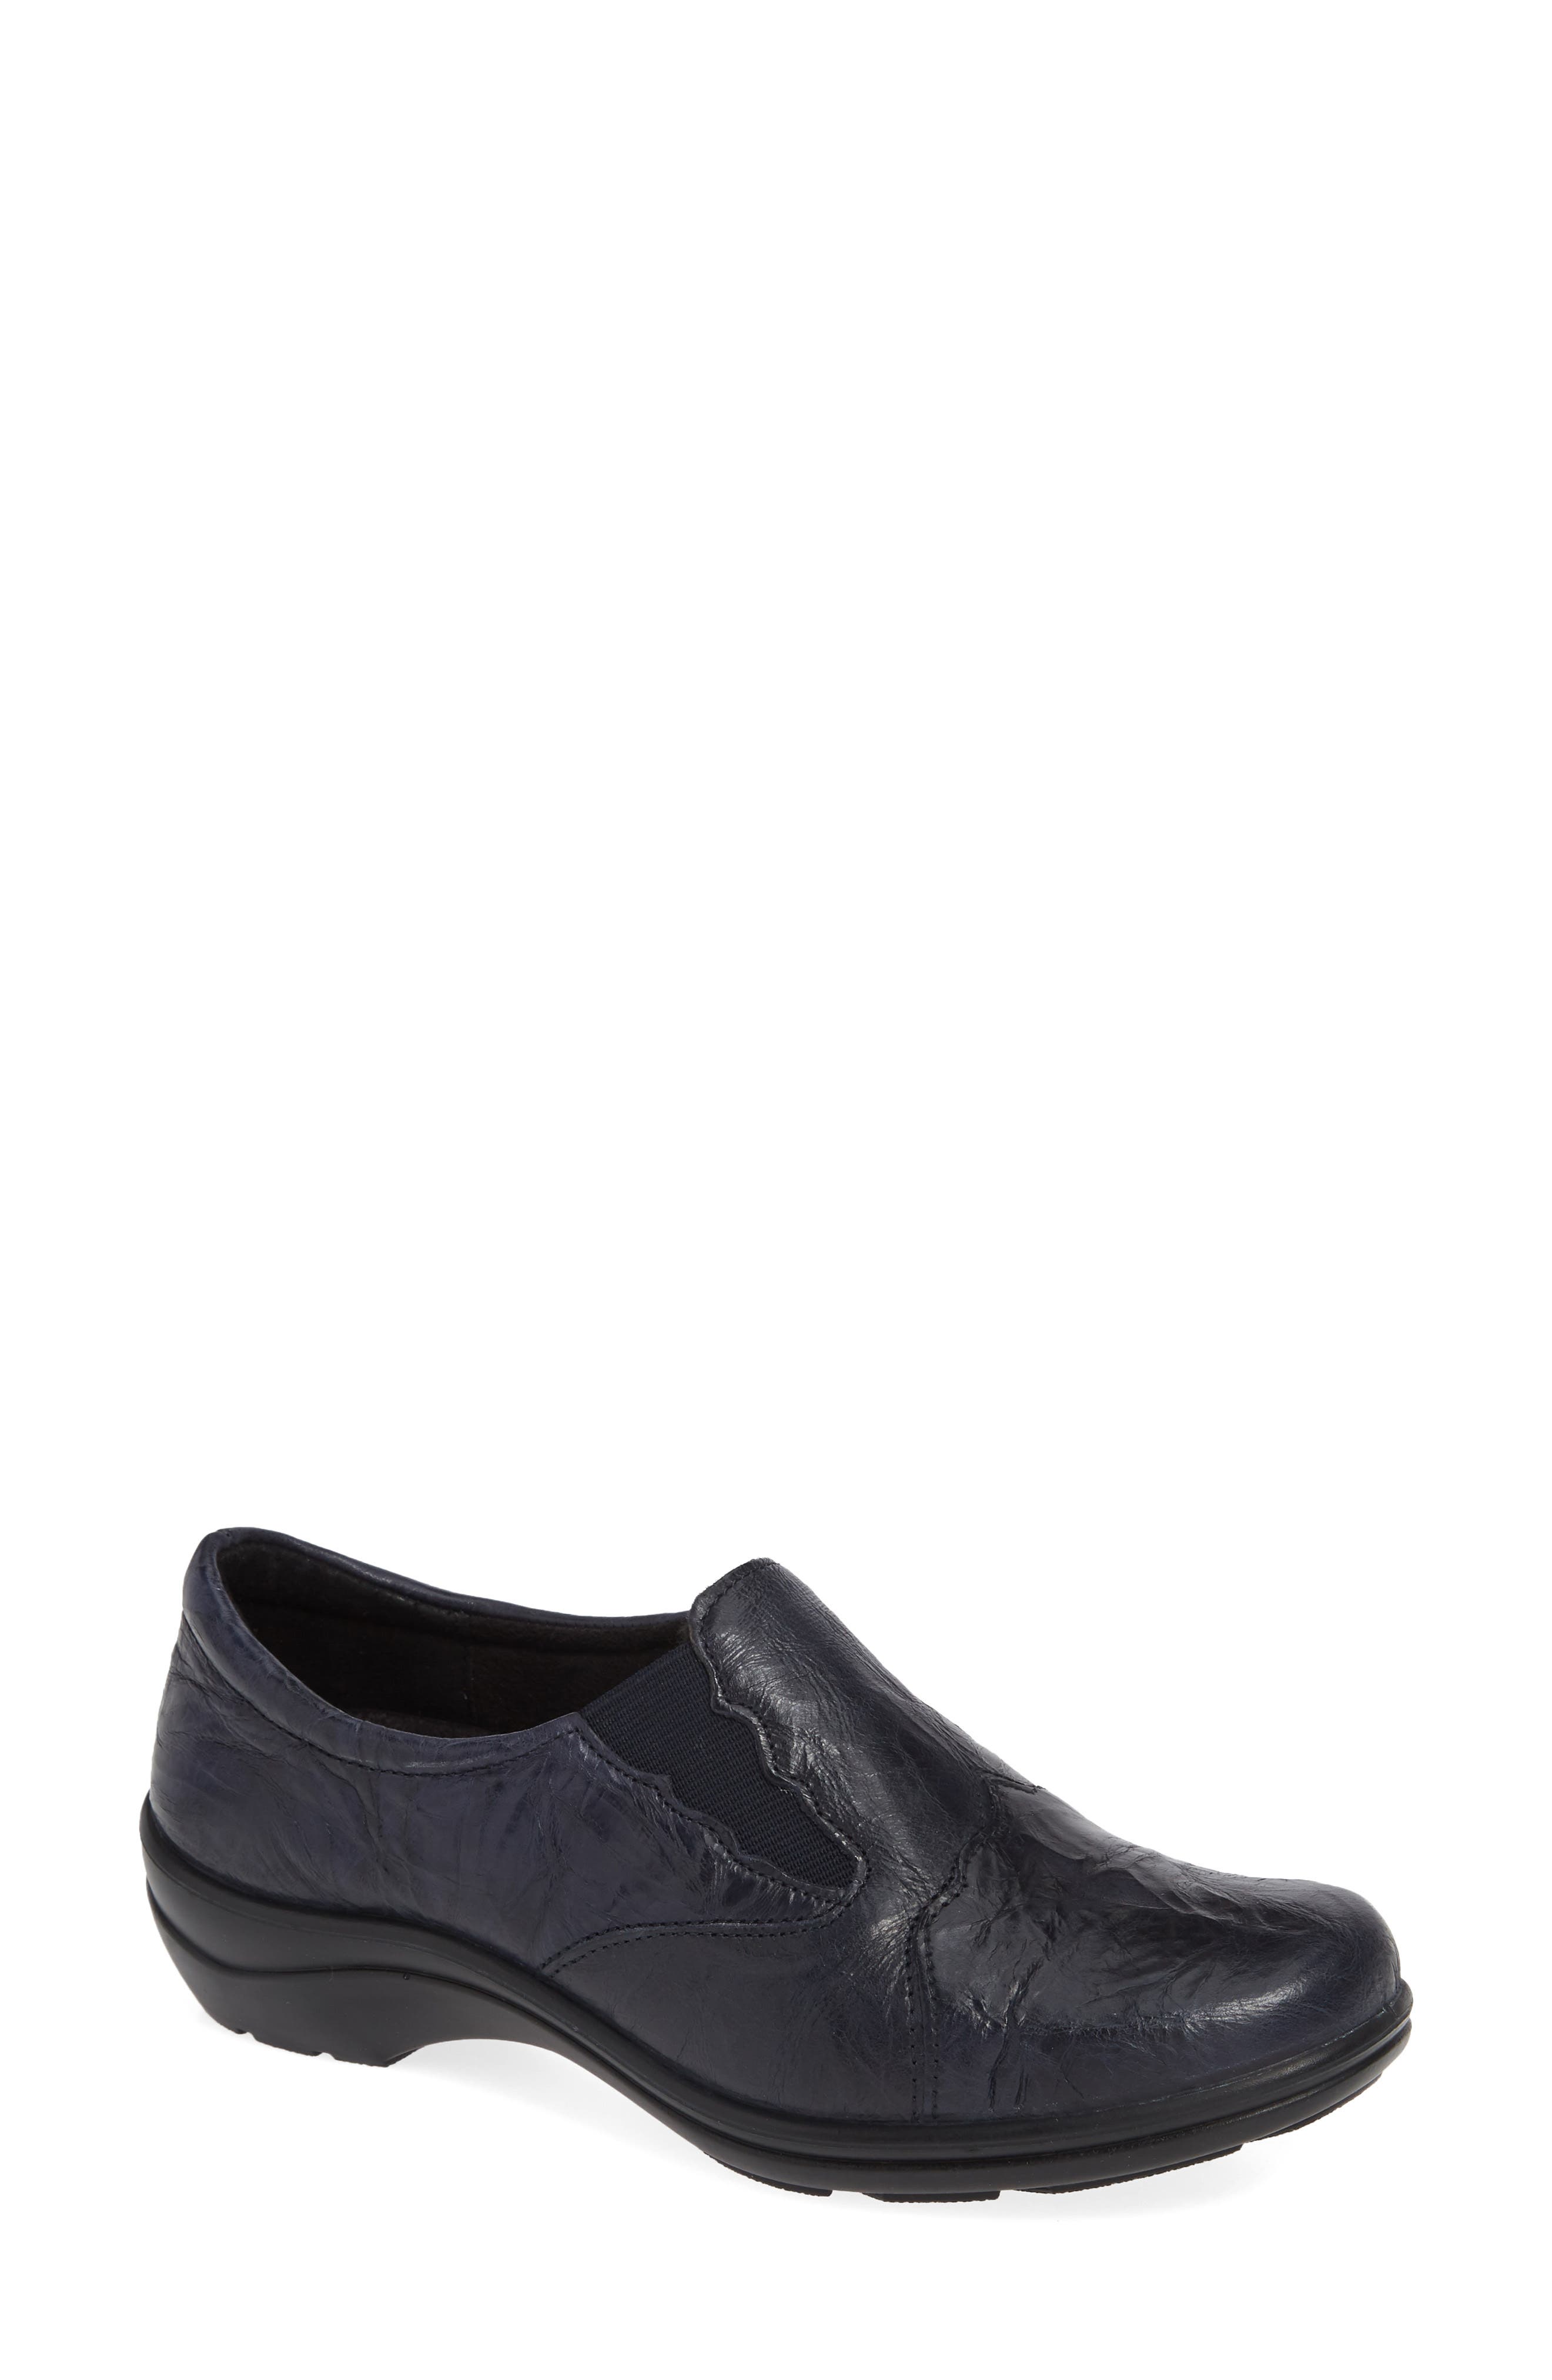 Romika® Clearance Shoes | Nordstrom